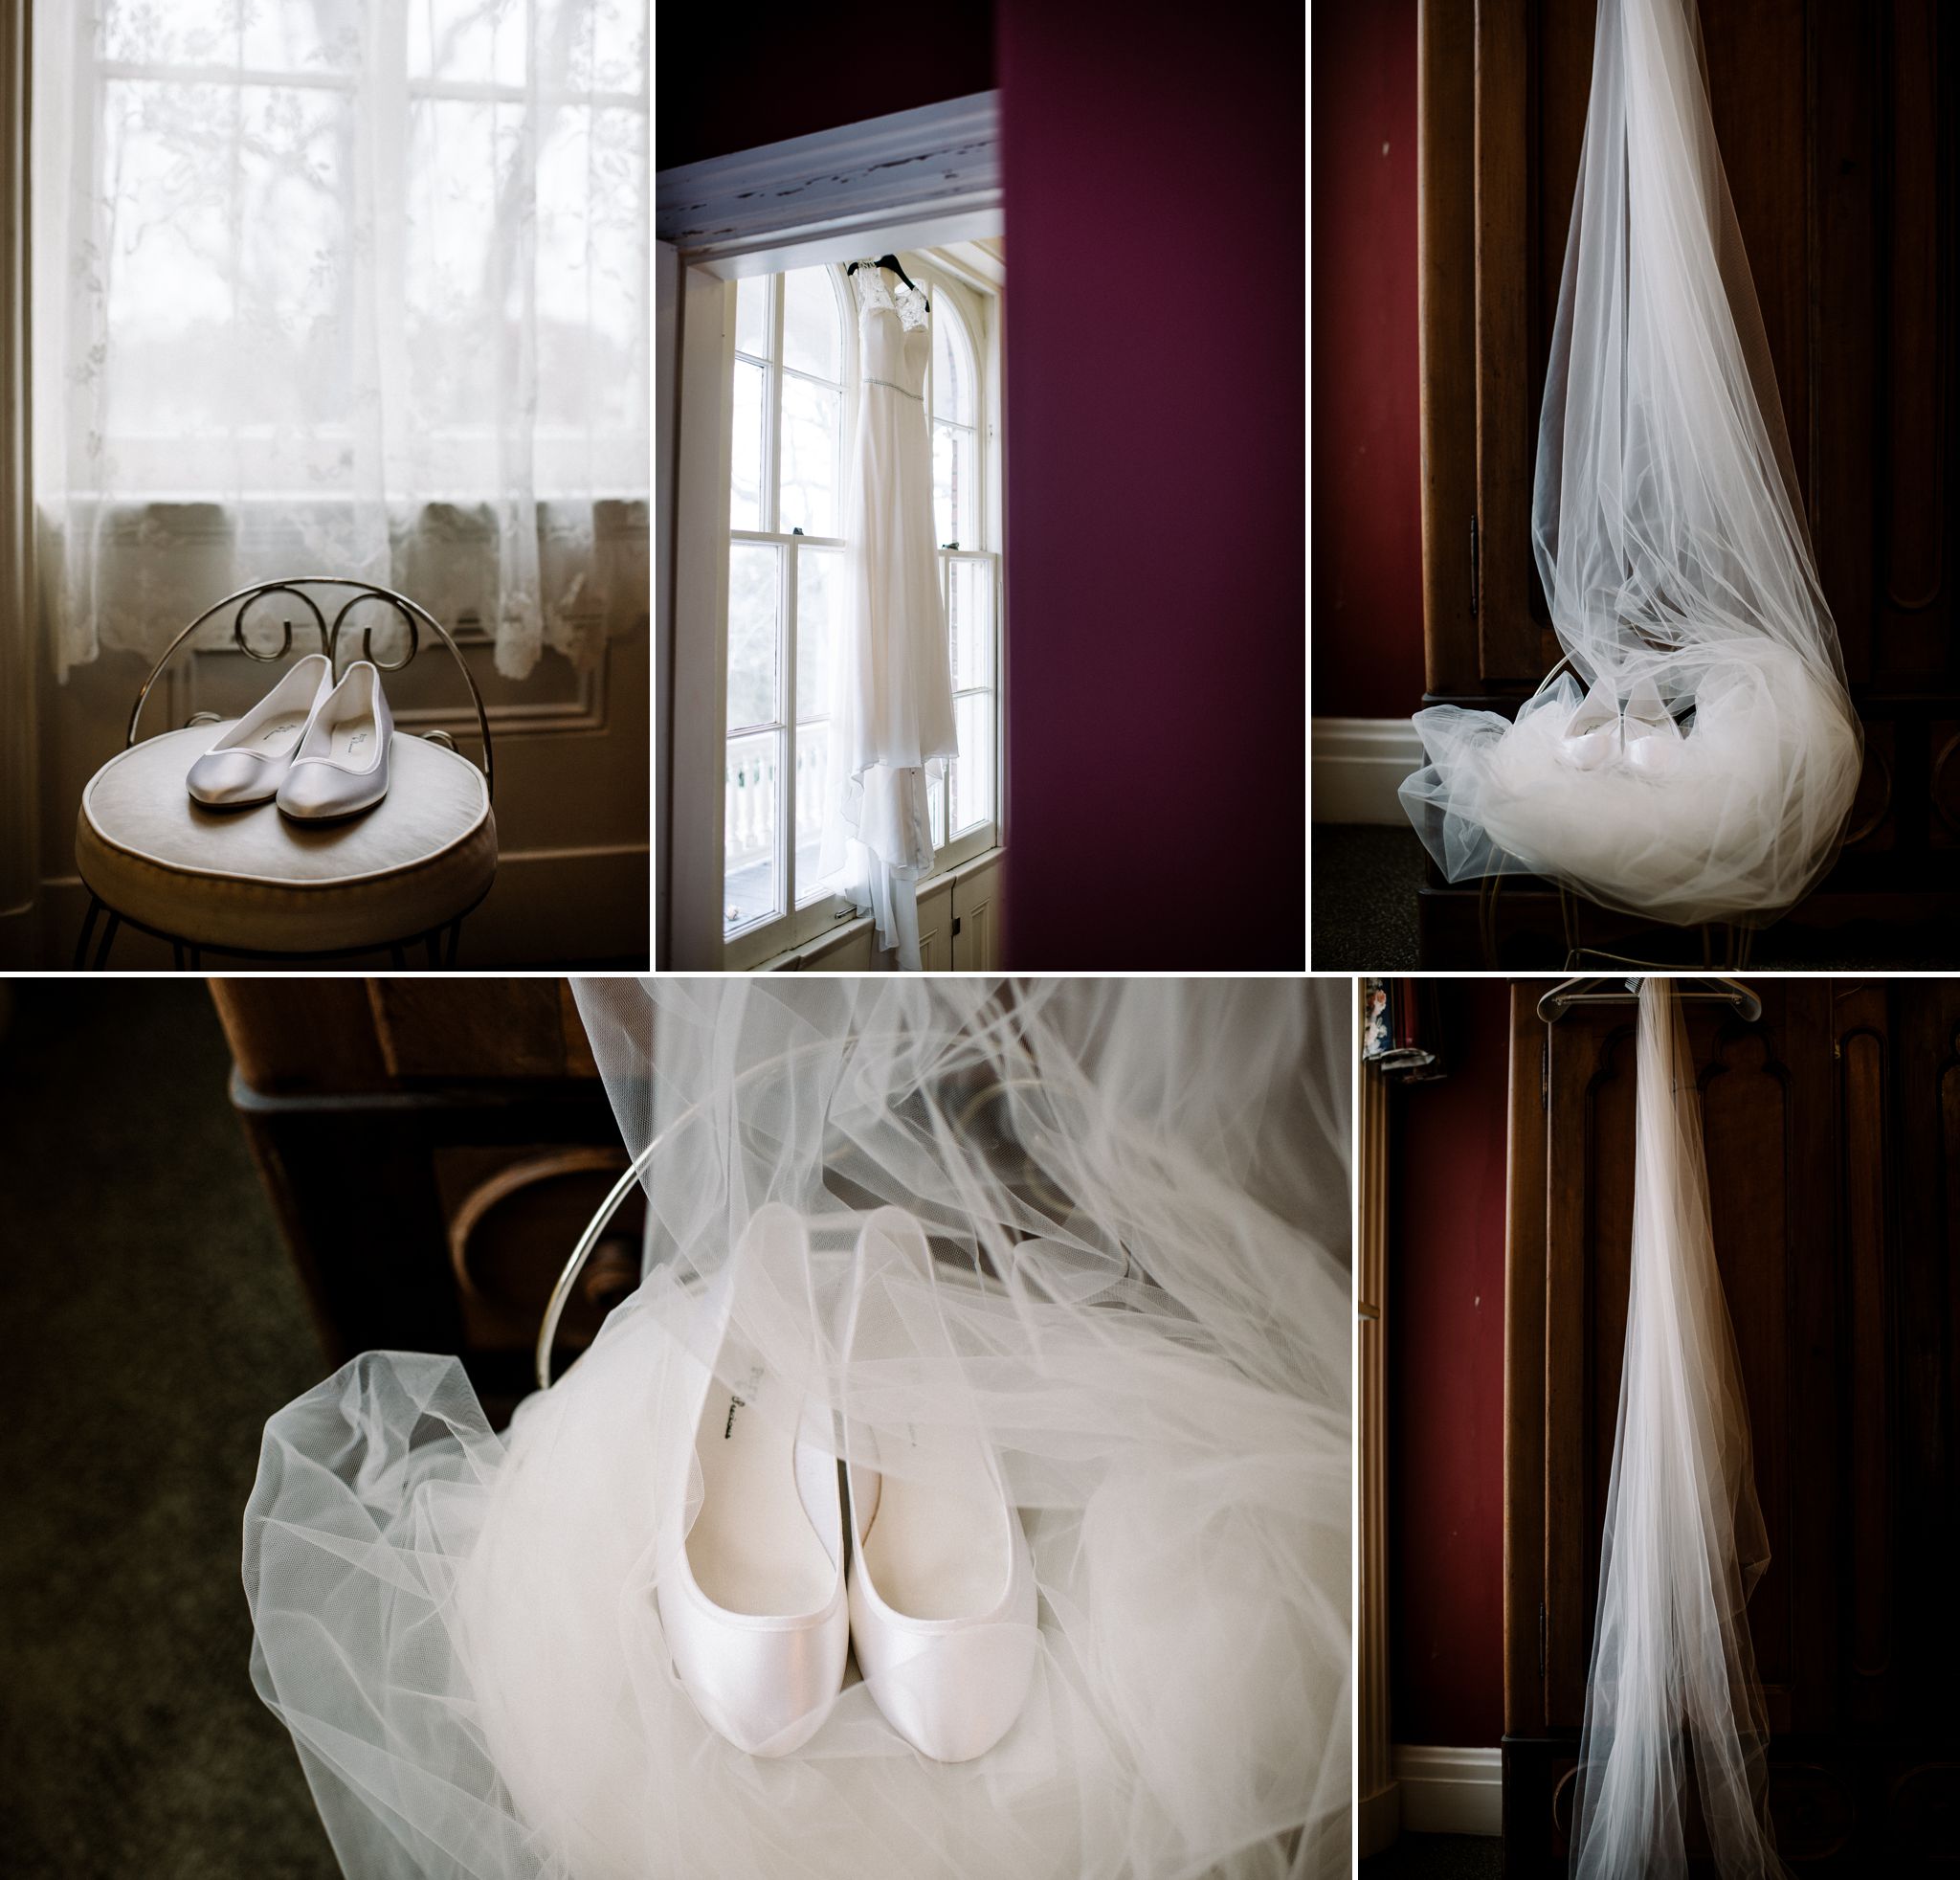 A collage of details of the bride's dress, veil, and shoes in one of the bedrooms in the Larimore House.